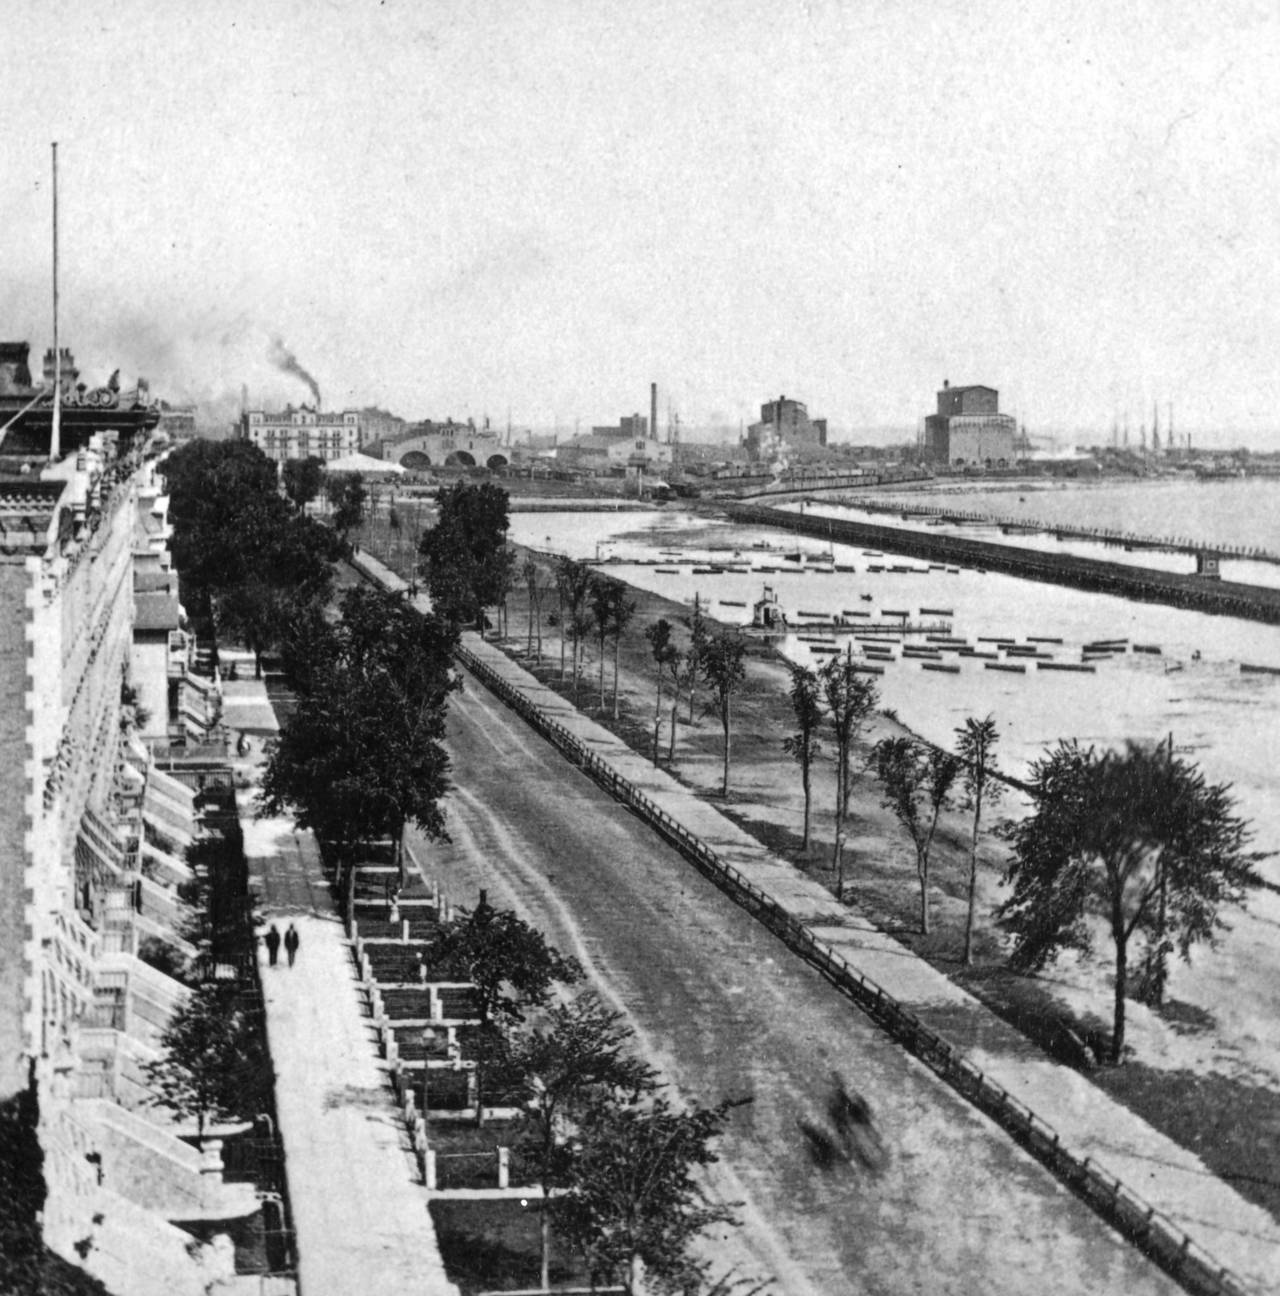 Looking north on Michigan Avenue in 1868, with the homes of prosperous businessmen on the left. Grant Park was nothing more than a marsh-filled lagoon, with rail lines on the right, between Lake Michigan and the lagoon-like area. The estimated vantage point of this photo is from where Congress Avenue is now located.